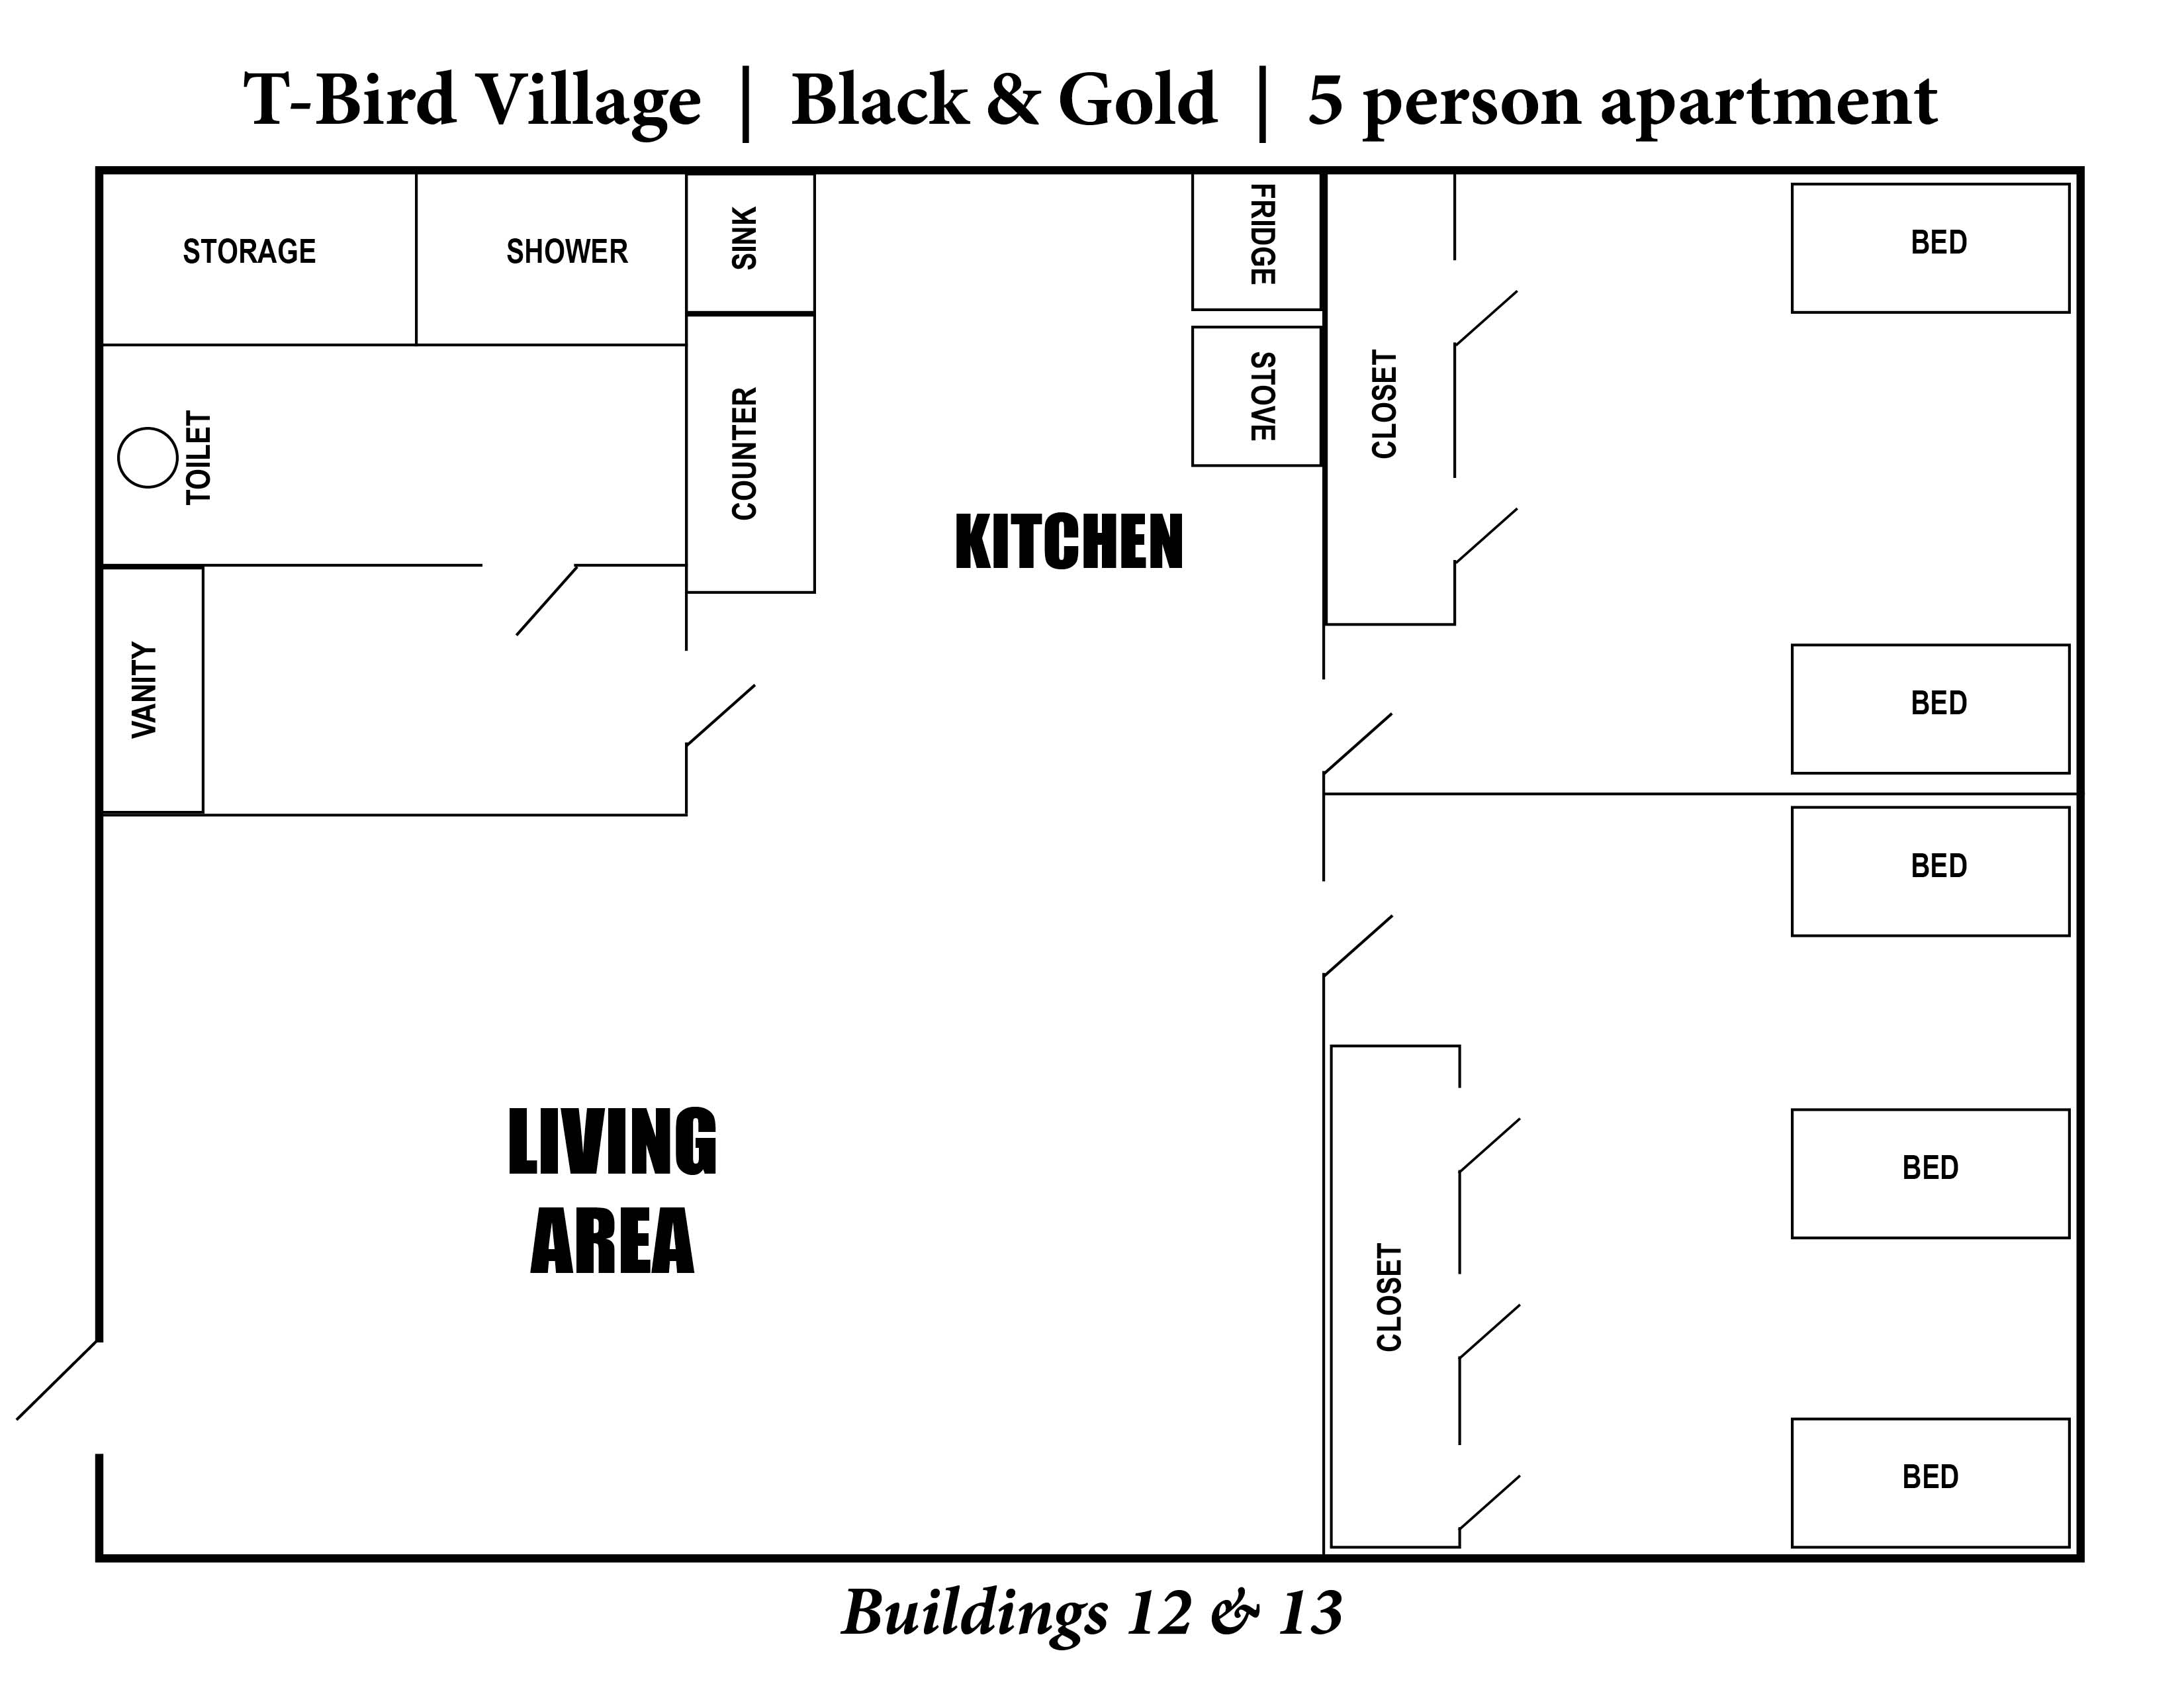 A photo of the layout of T-Bird Village 5 person apartment.